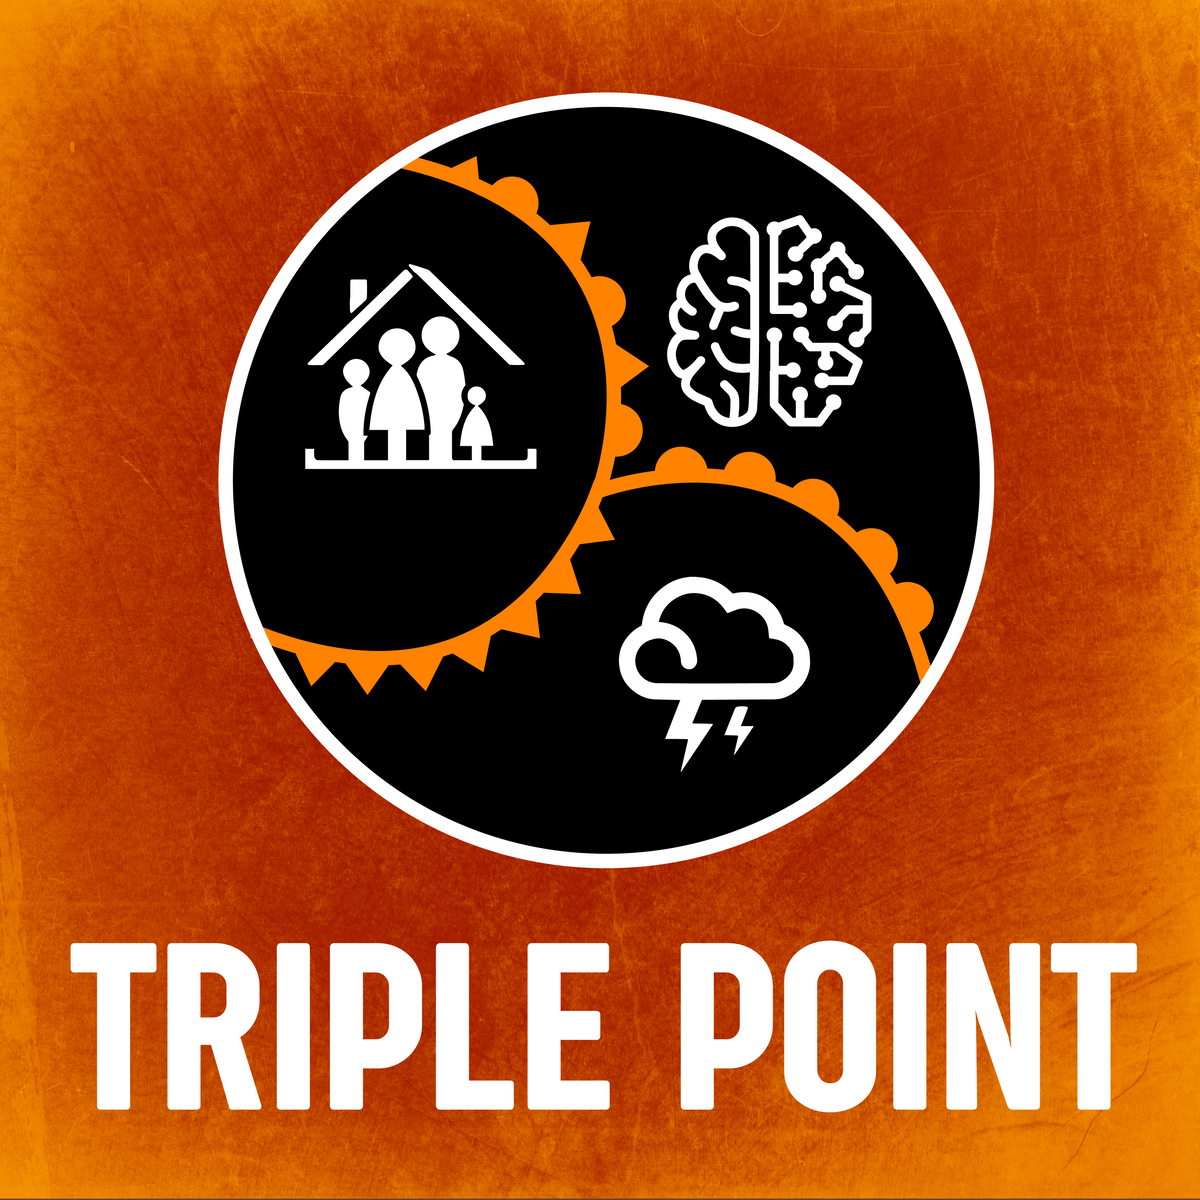 Welcome to the Triple Point Newsletter & Podcast!